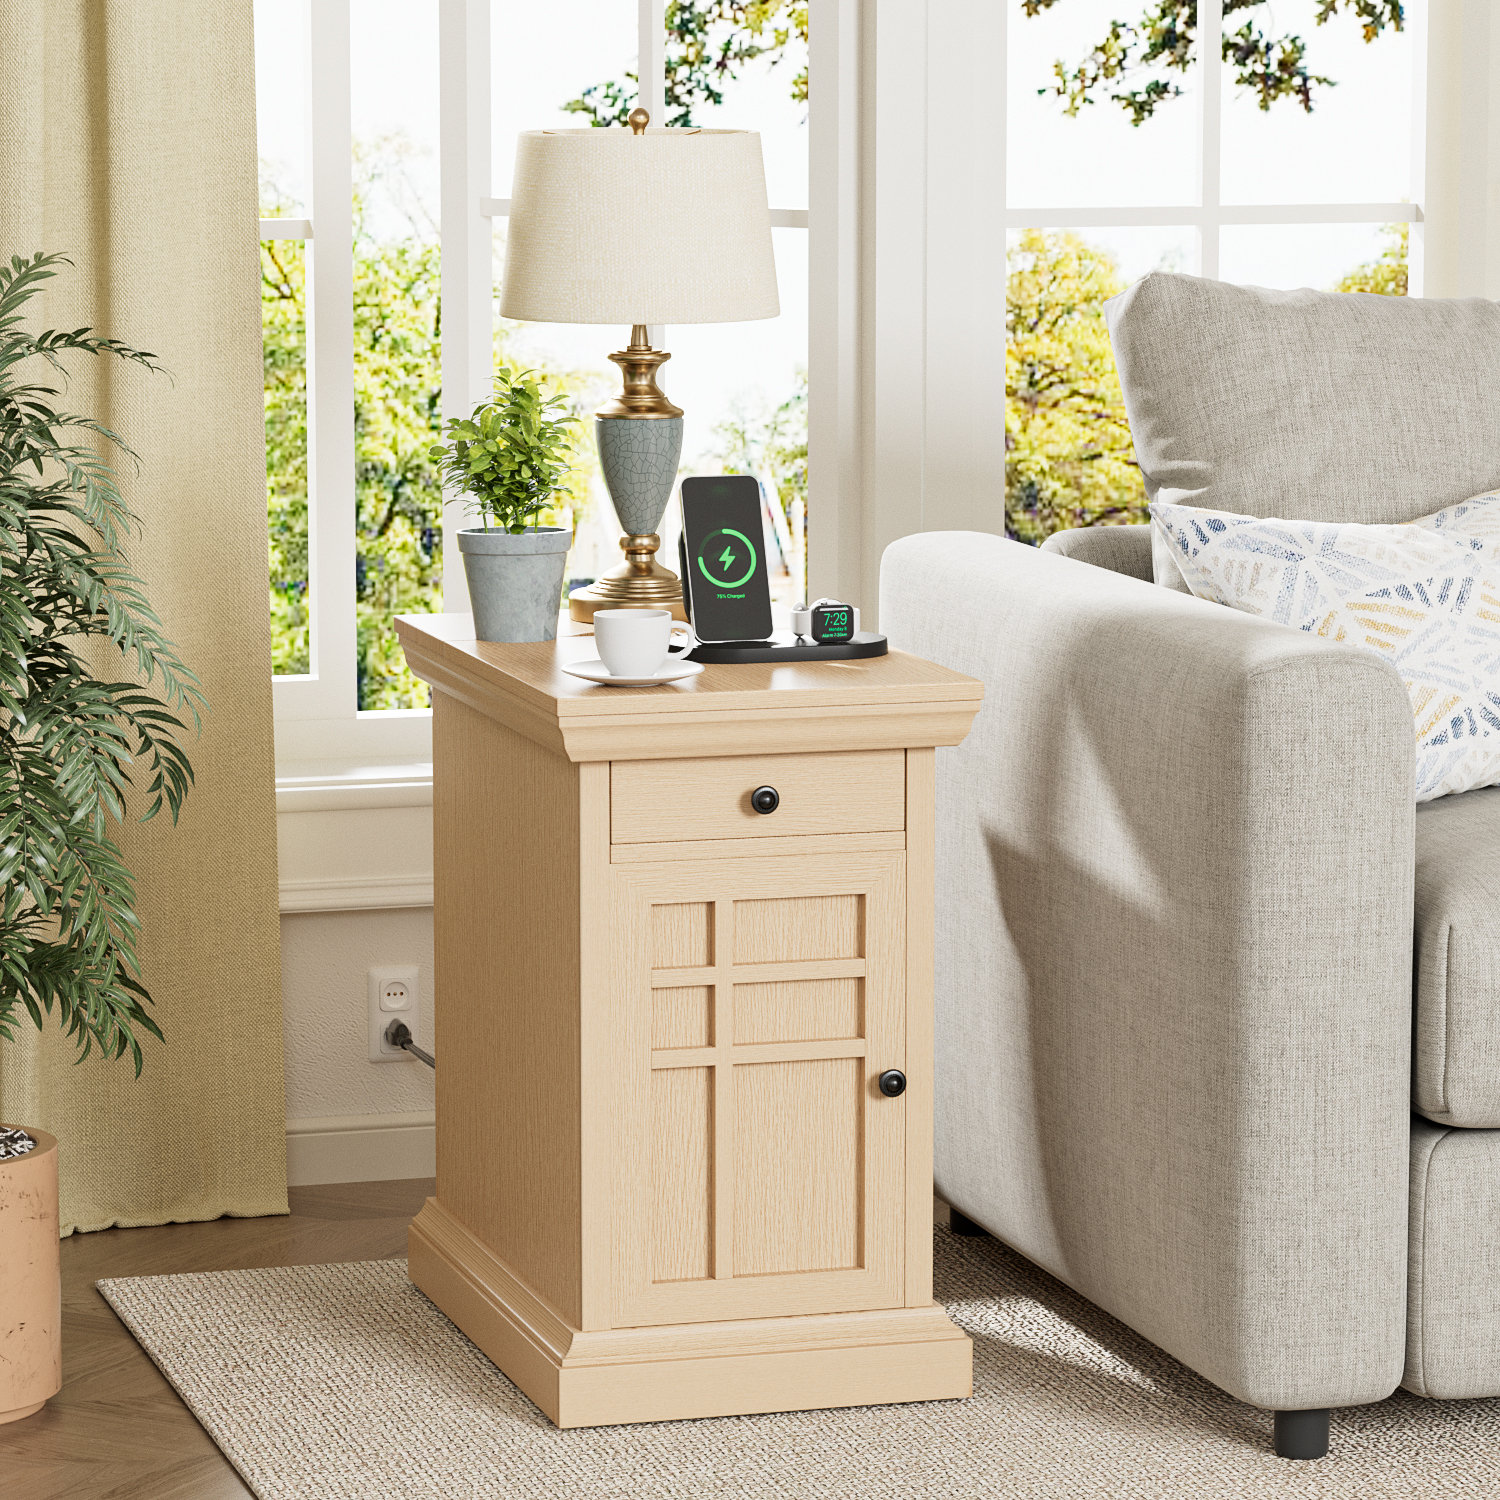 Angelynne Floor Shelf End Table Set with Storage and Built-in Outlets